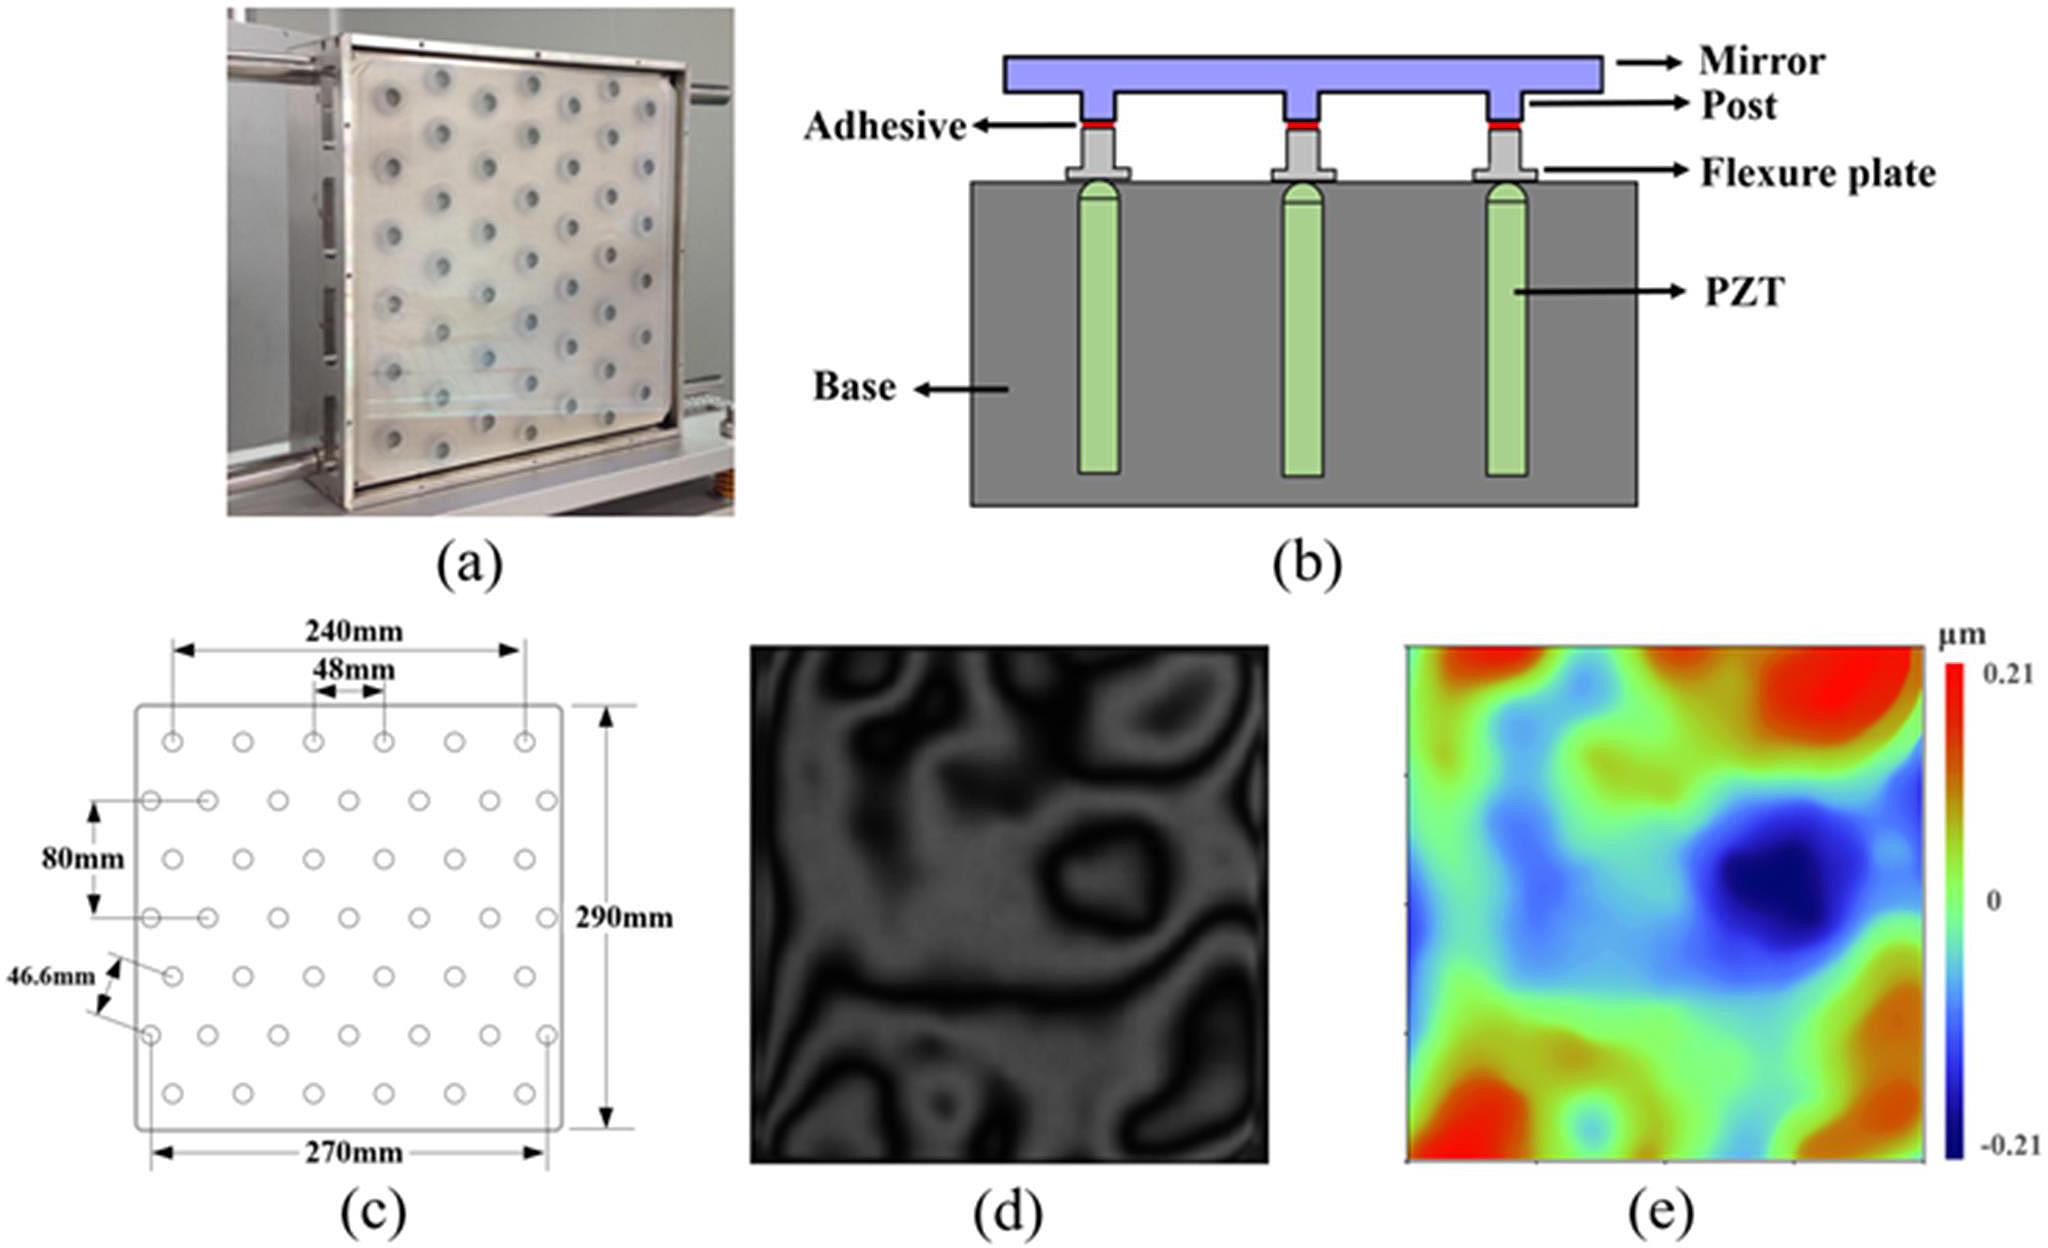 (a) Photo and (b) schematic diagram of the lab-manufactured DM; (c) hexagonally distributed 45 actuators in the DM; (d) interference fringe and (e) wavefront of the initial surface shape of the DM.